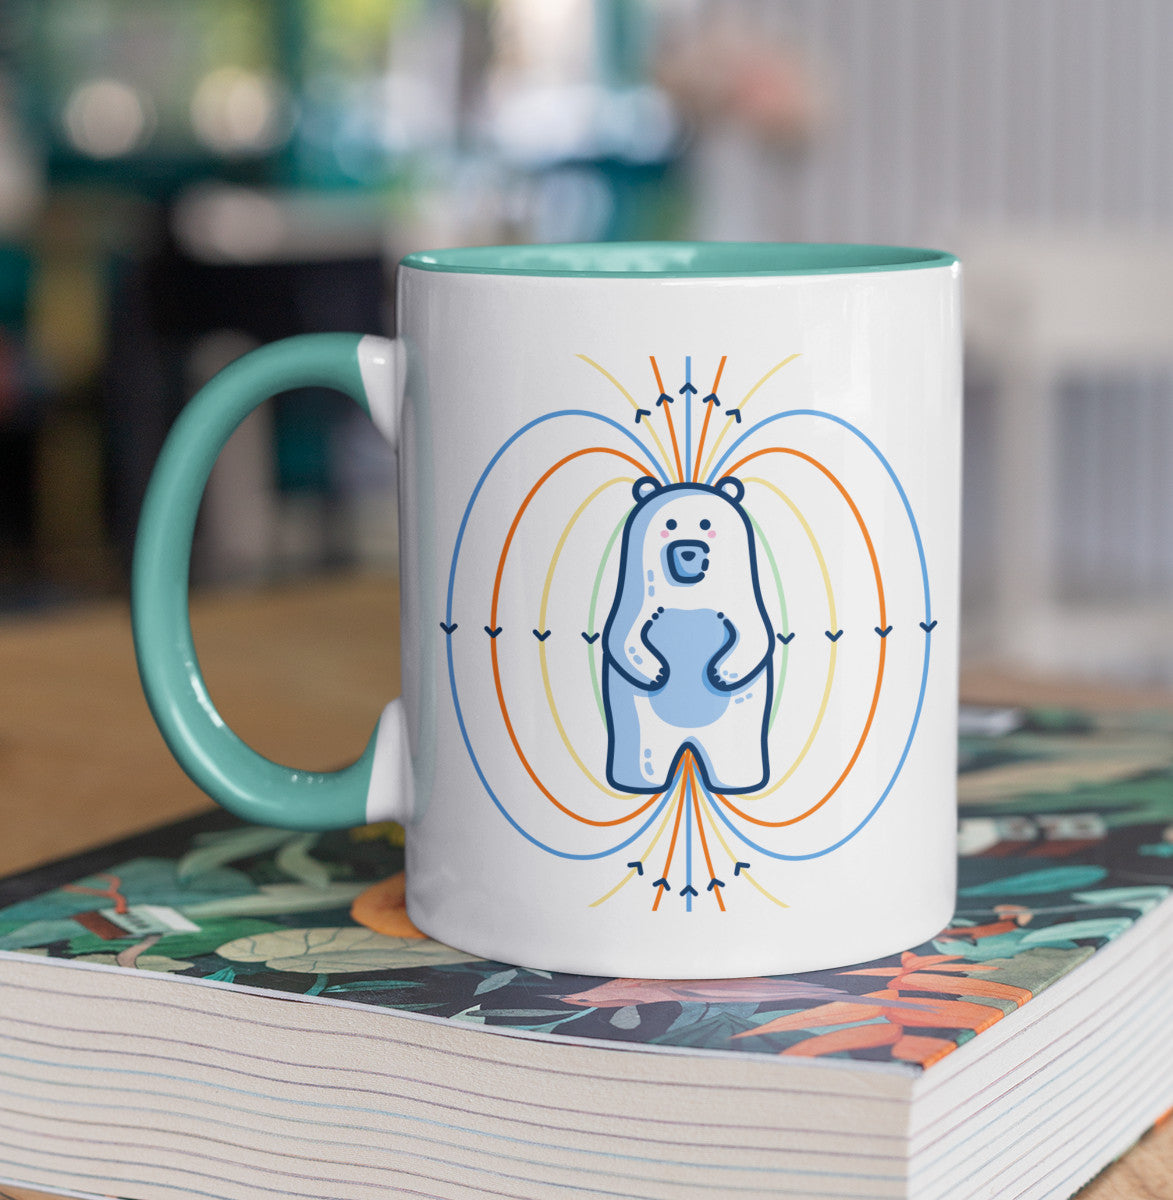 A two toned white and spearmint ceramic mug, handle to the left, with a design of a white polar bear standing up and blue, orange and yellow magnetic field lines coming out of it.